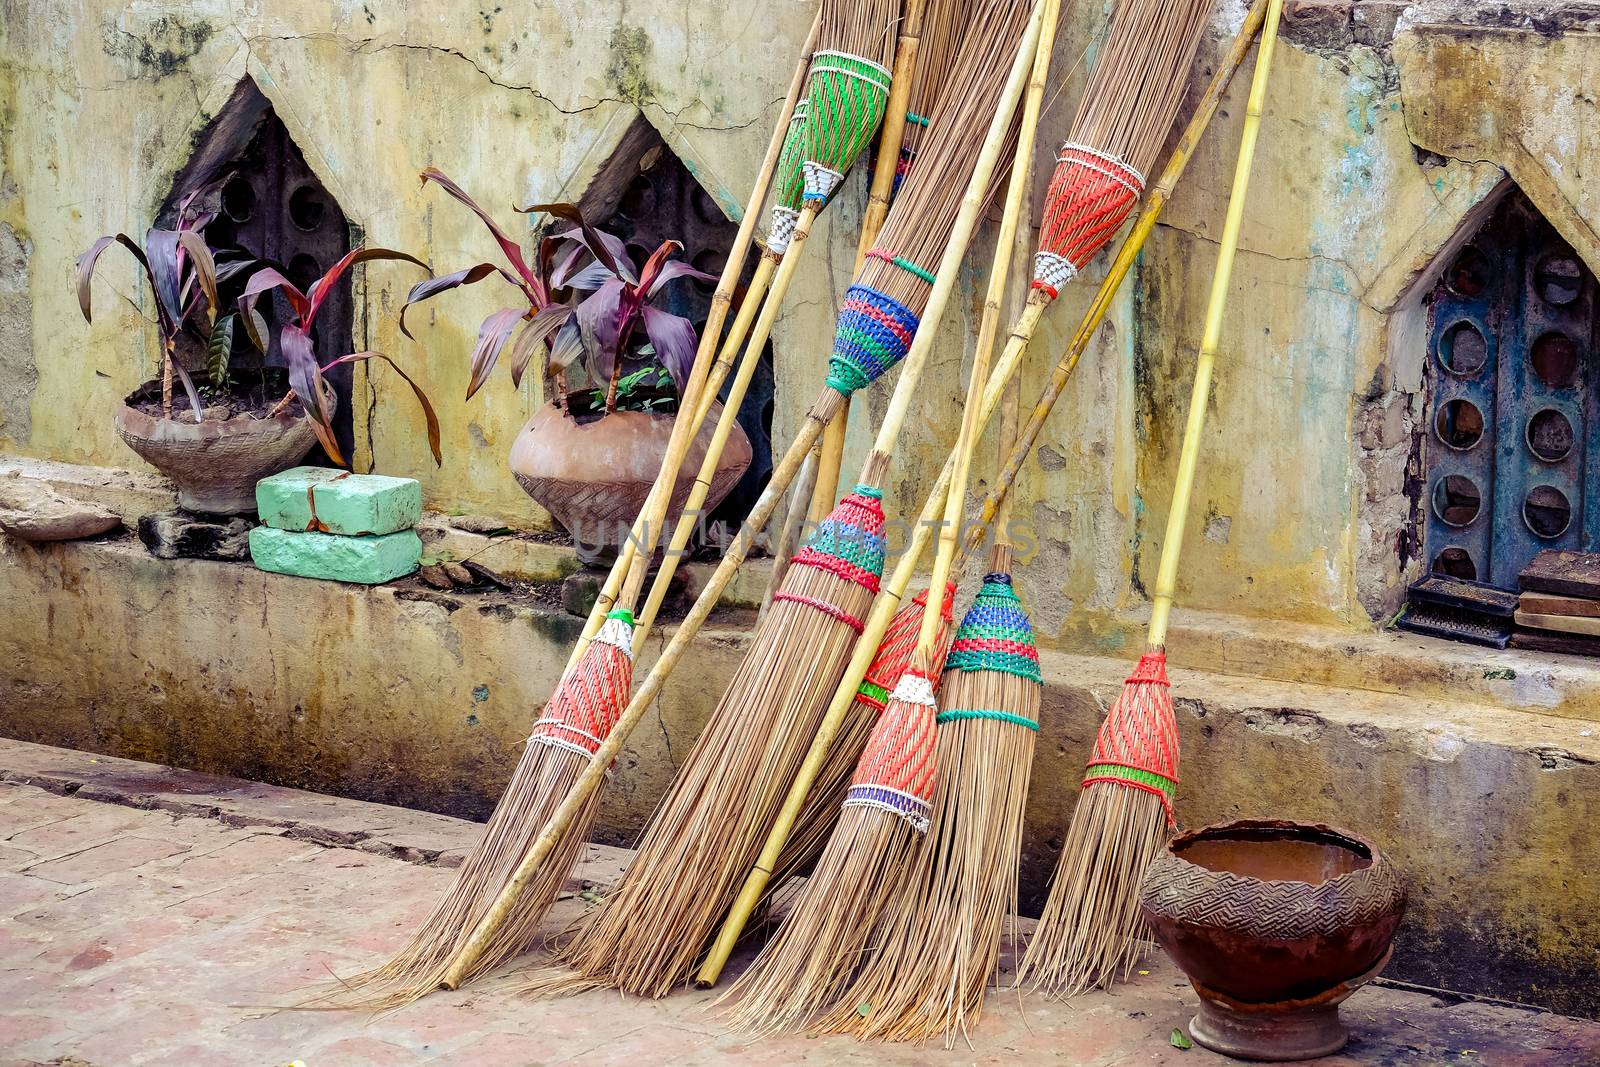 Detail of colorful rustic brooms in vintage style against weathered wall